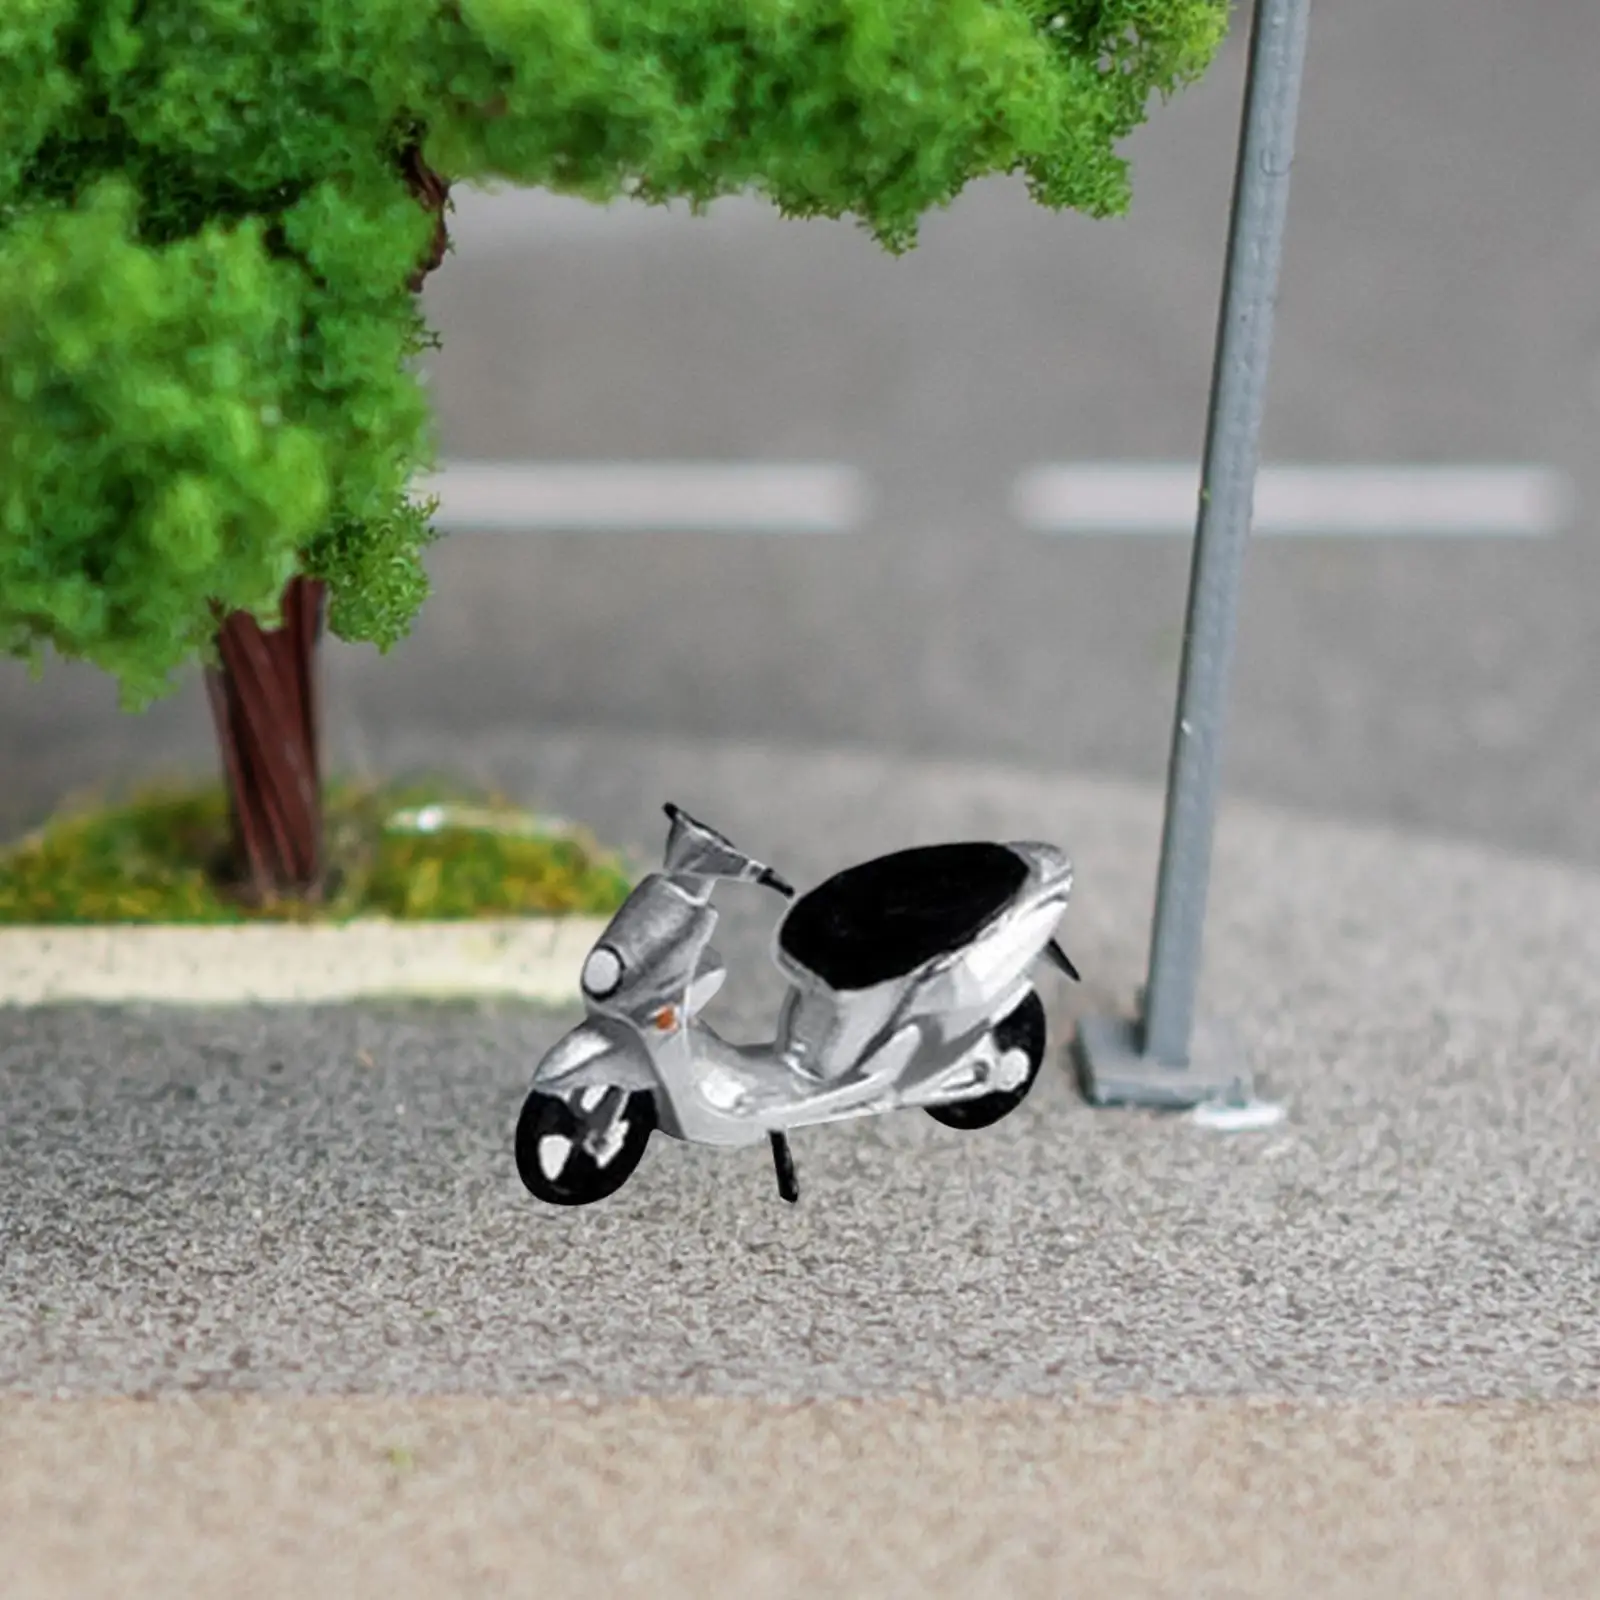 1:64 Diorama Street Motorcycle Model Desk Decoration Miniature Doll Model for Photography Props Miniature Scene Accessories